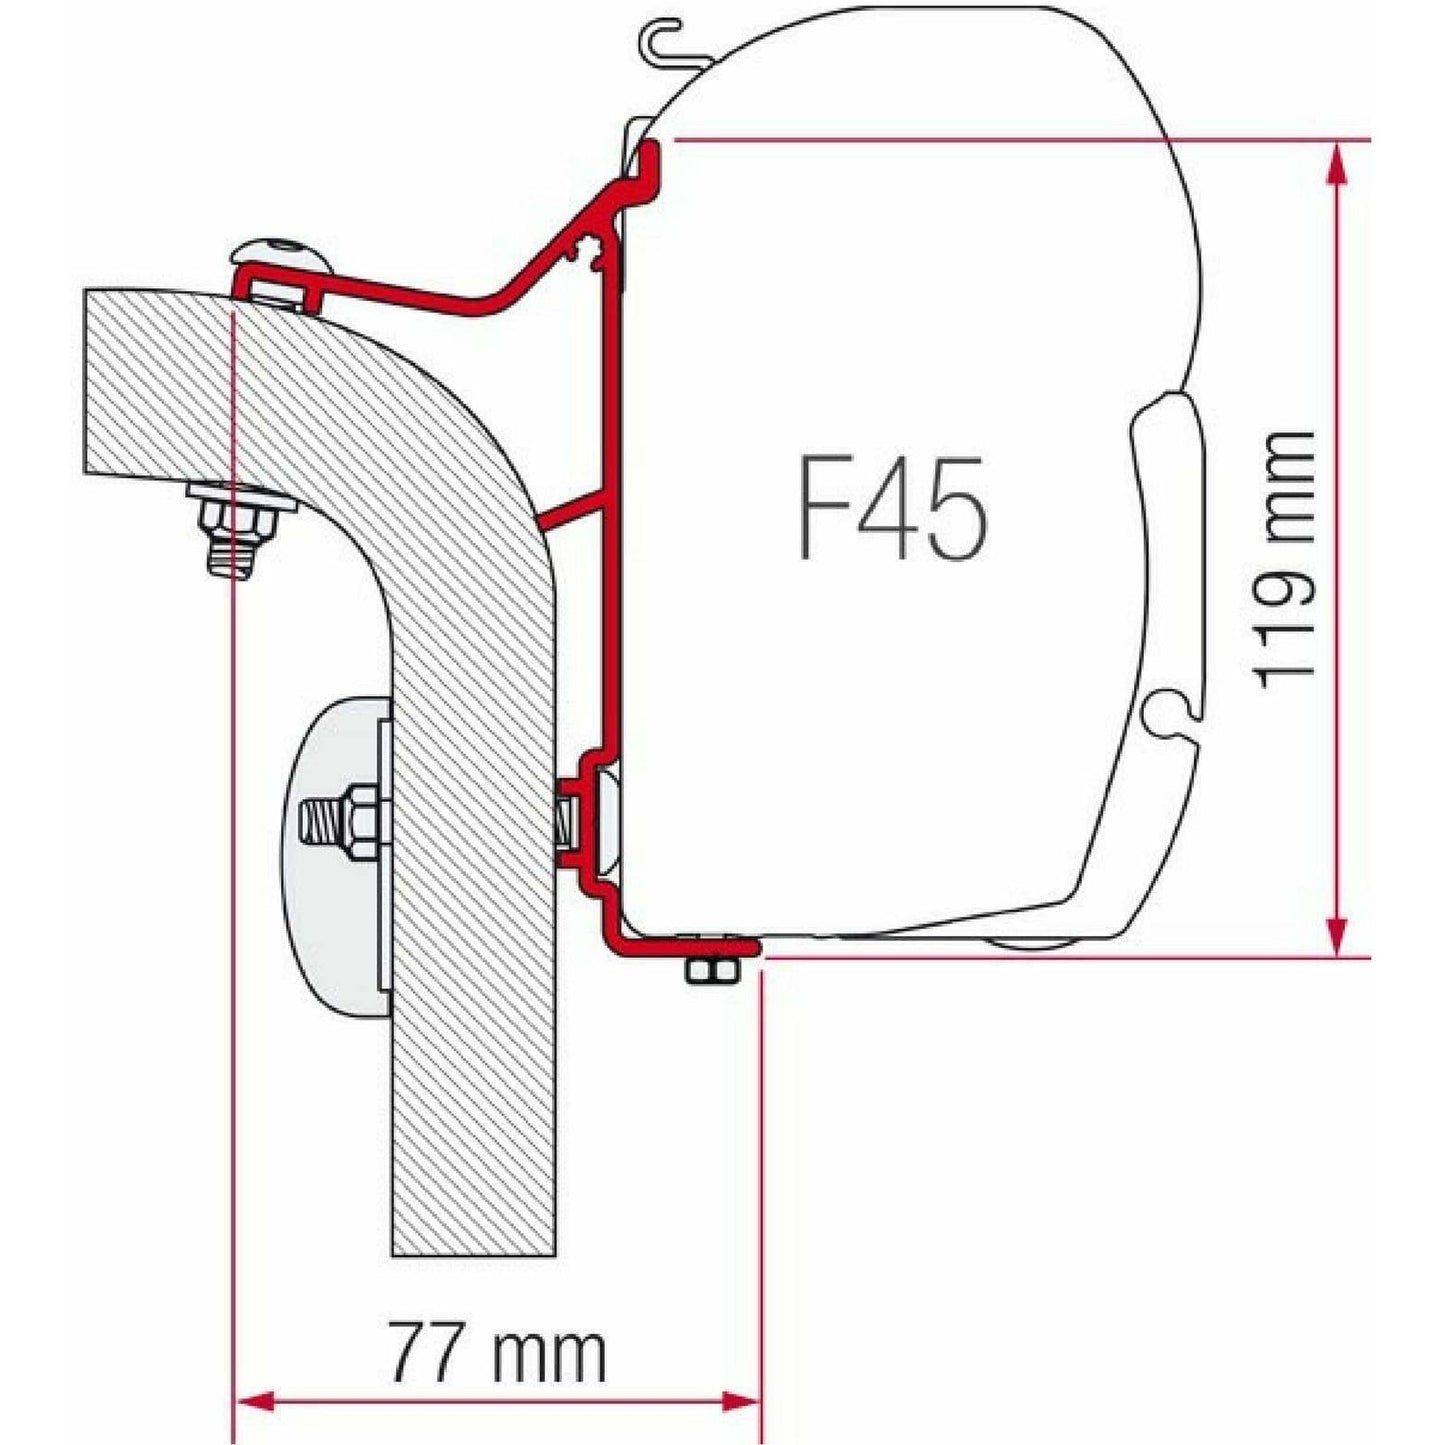 Fiamma Hymer Van/B2 Awning Adapter Kit made by Fiamma. A Awning Adapter sold by Quality Caravan Awnings